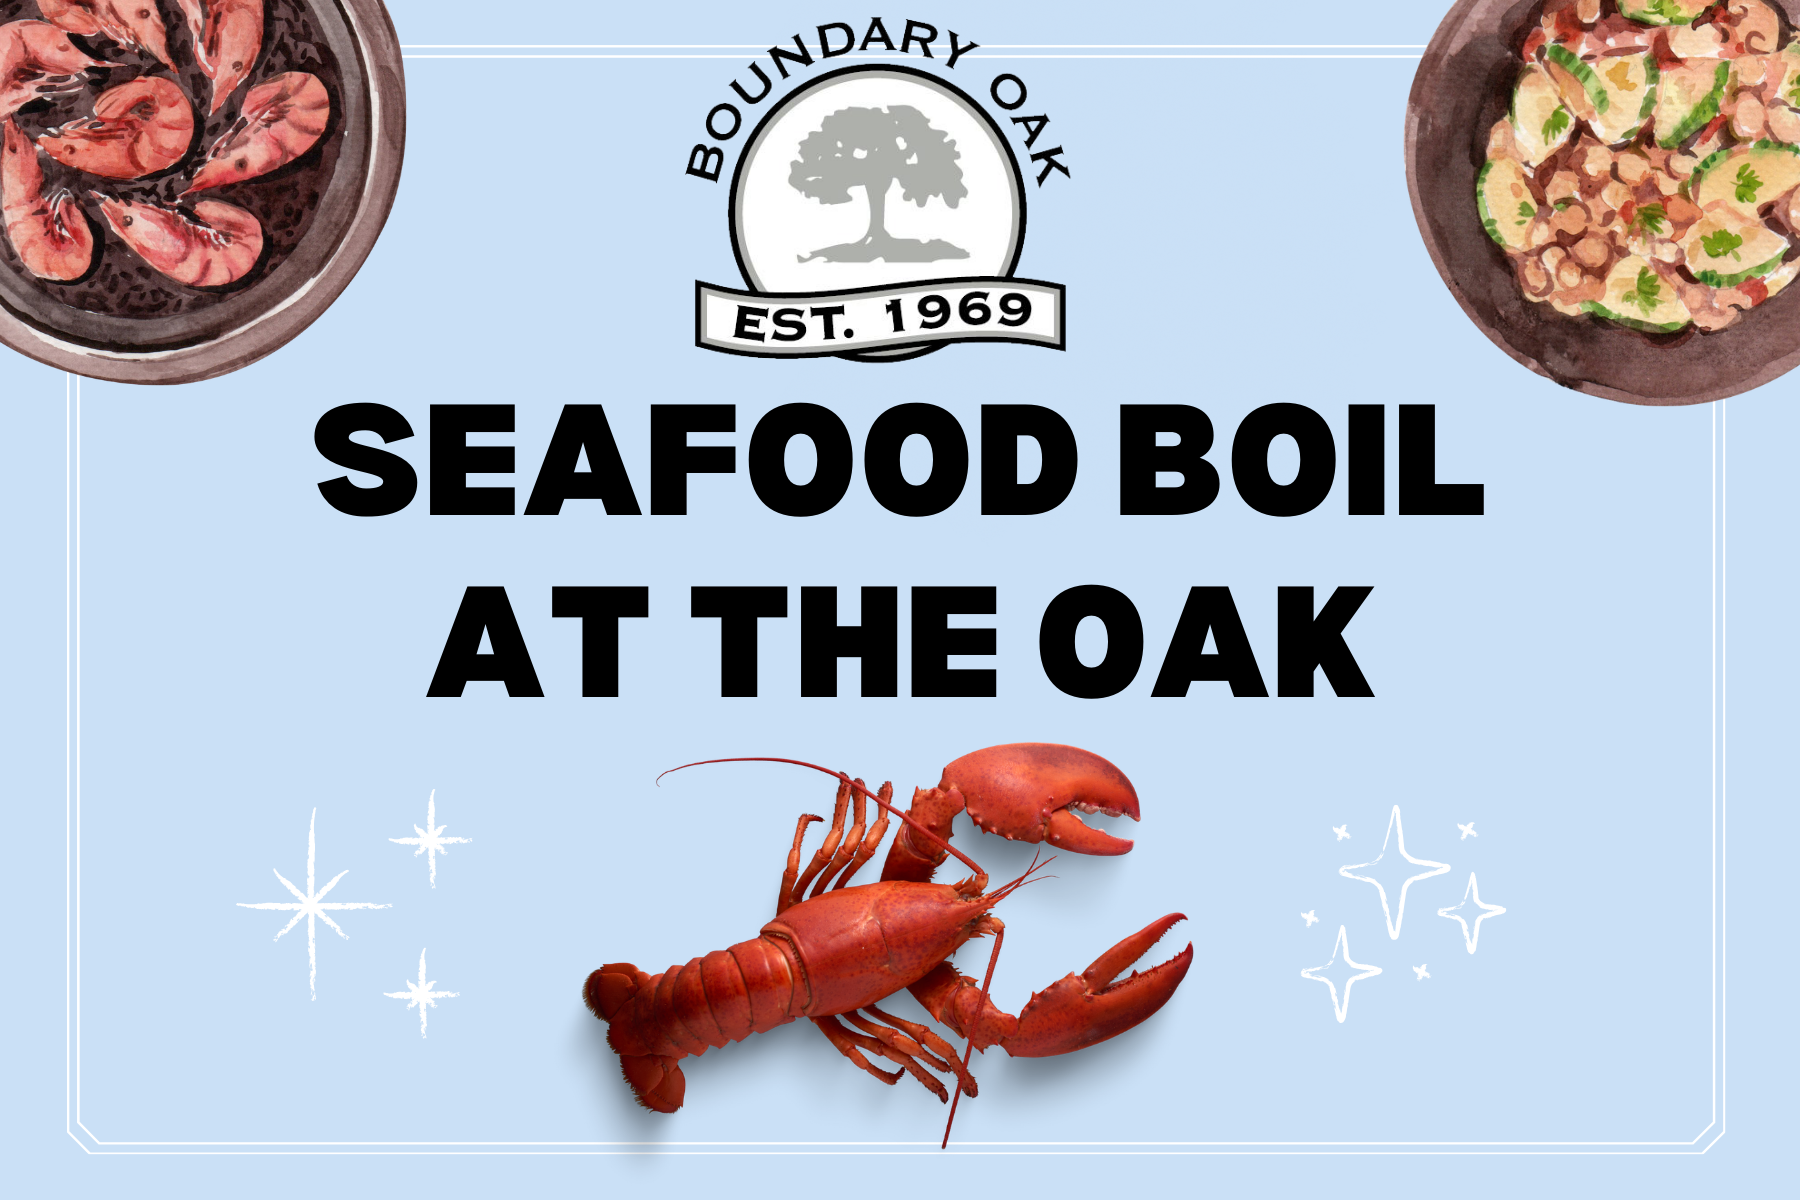 Seafood Boil at the Oak Email Header 6 x 4 in